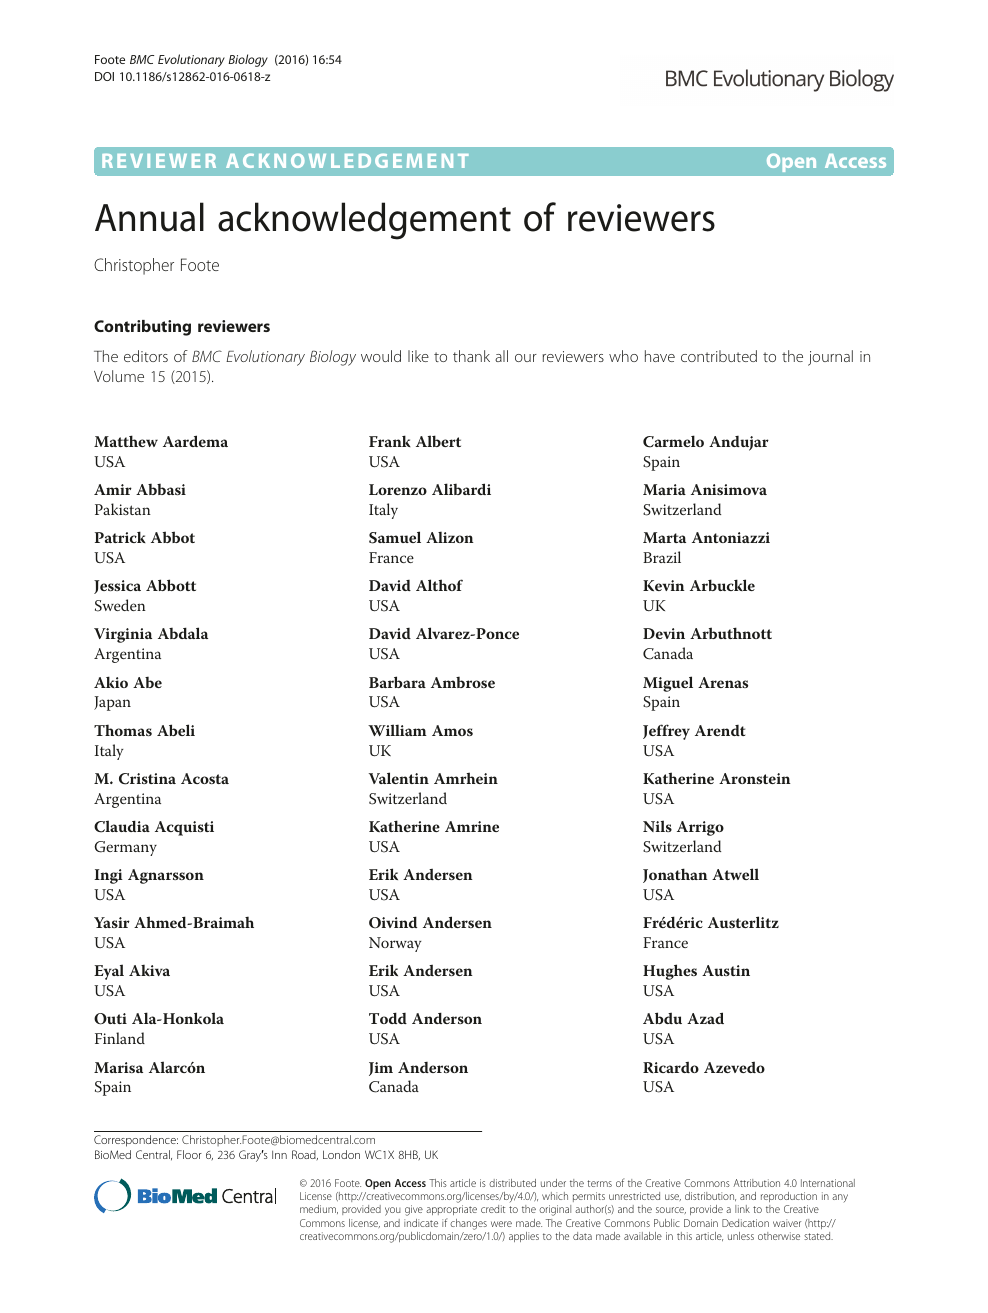 Reviewer acknowledgement 2012 – topic of research paper in Biological  sciences. Download scholarly article PDF and read for free on CyberLeninka  open science hub.